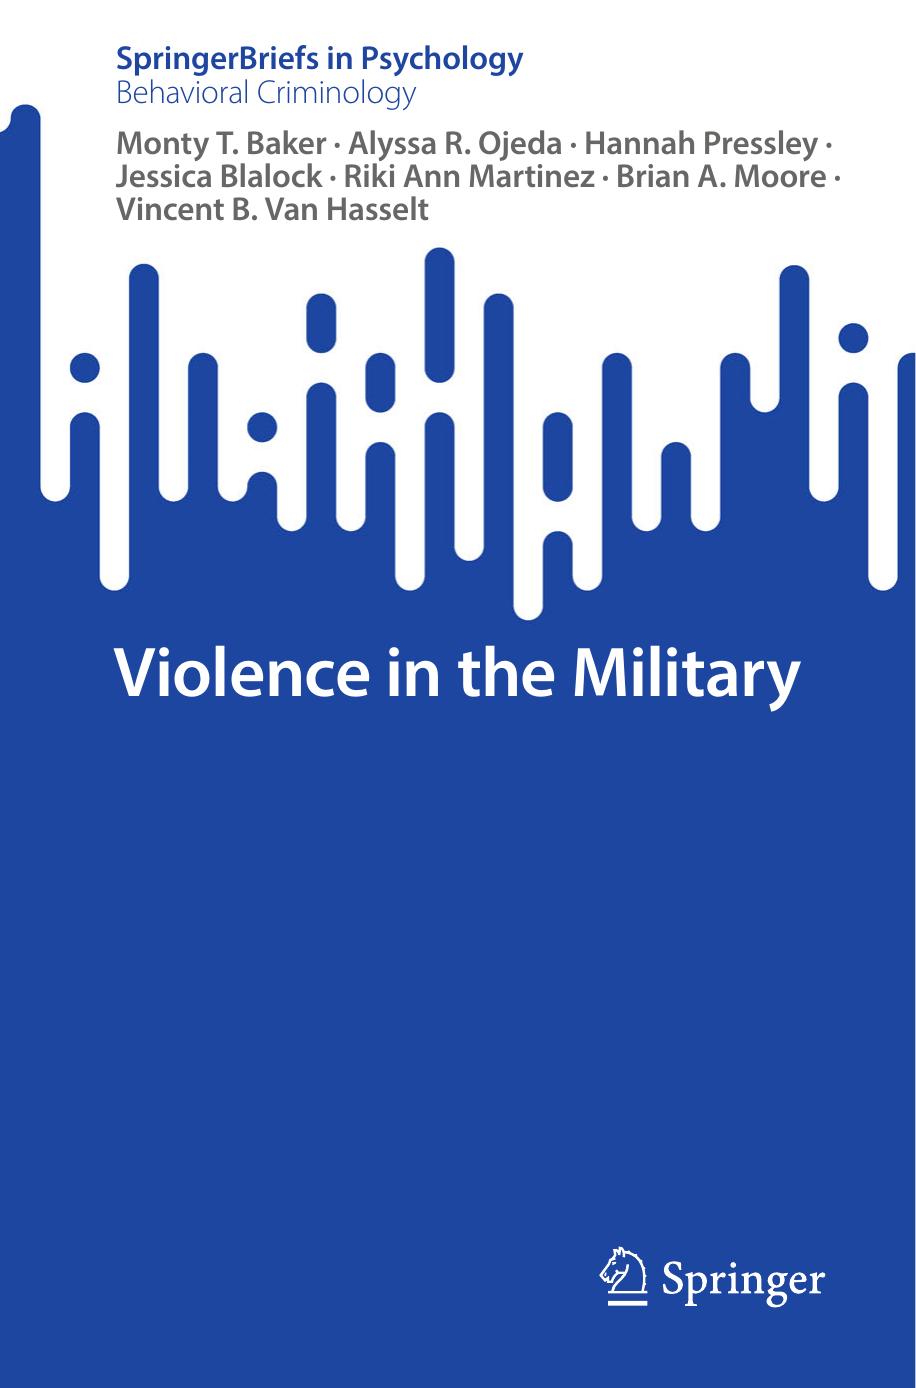 Violence in the Military by unknow